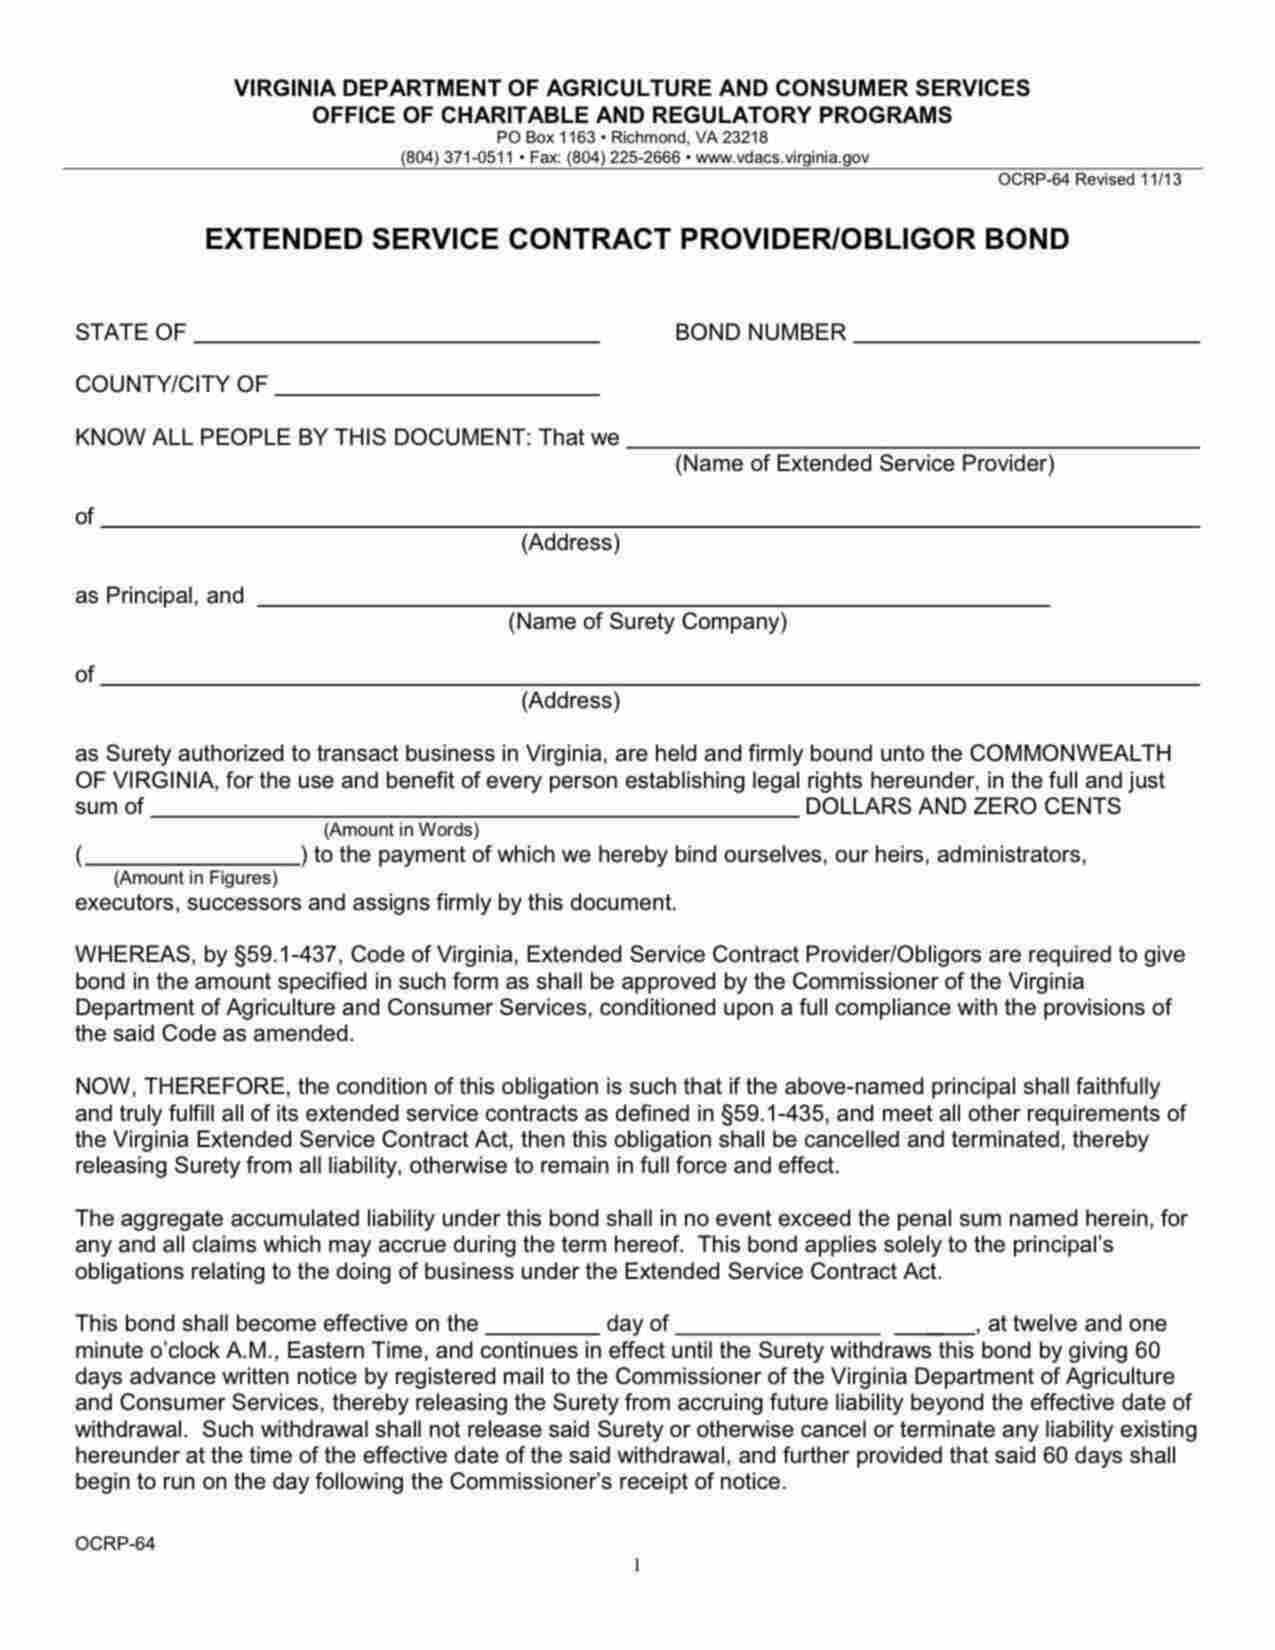 Virginia Extended Service Contract Provider Bond Form